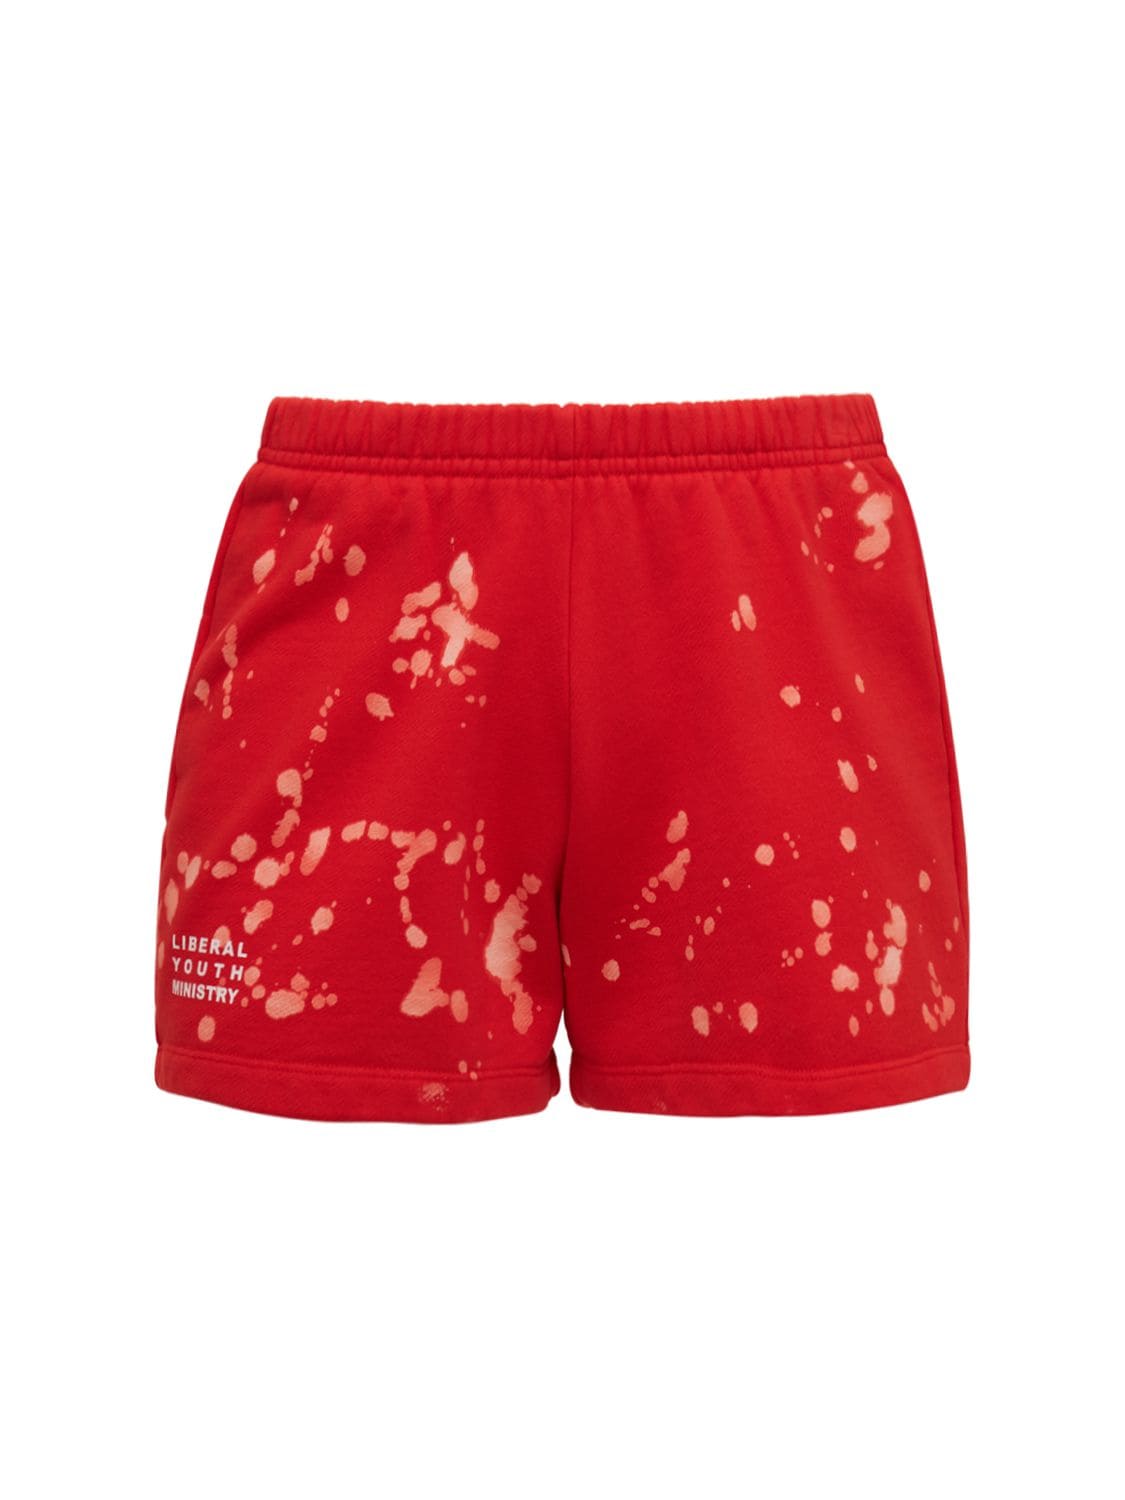 LIBERAL YOUTH MINISTRY Bleached Cotton Jersey Shorts